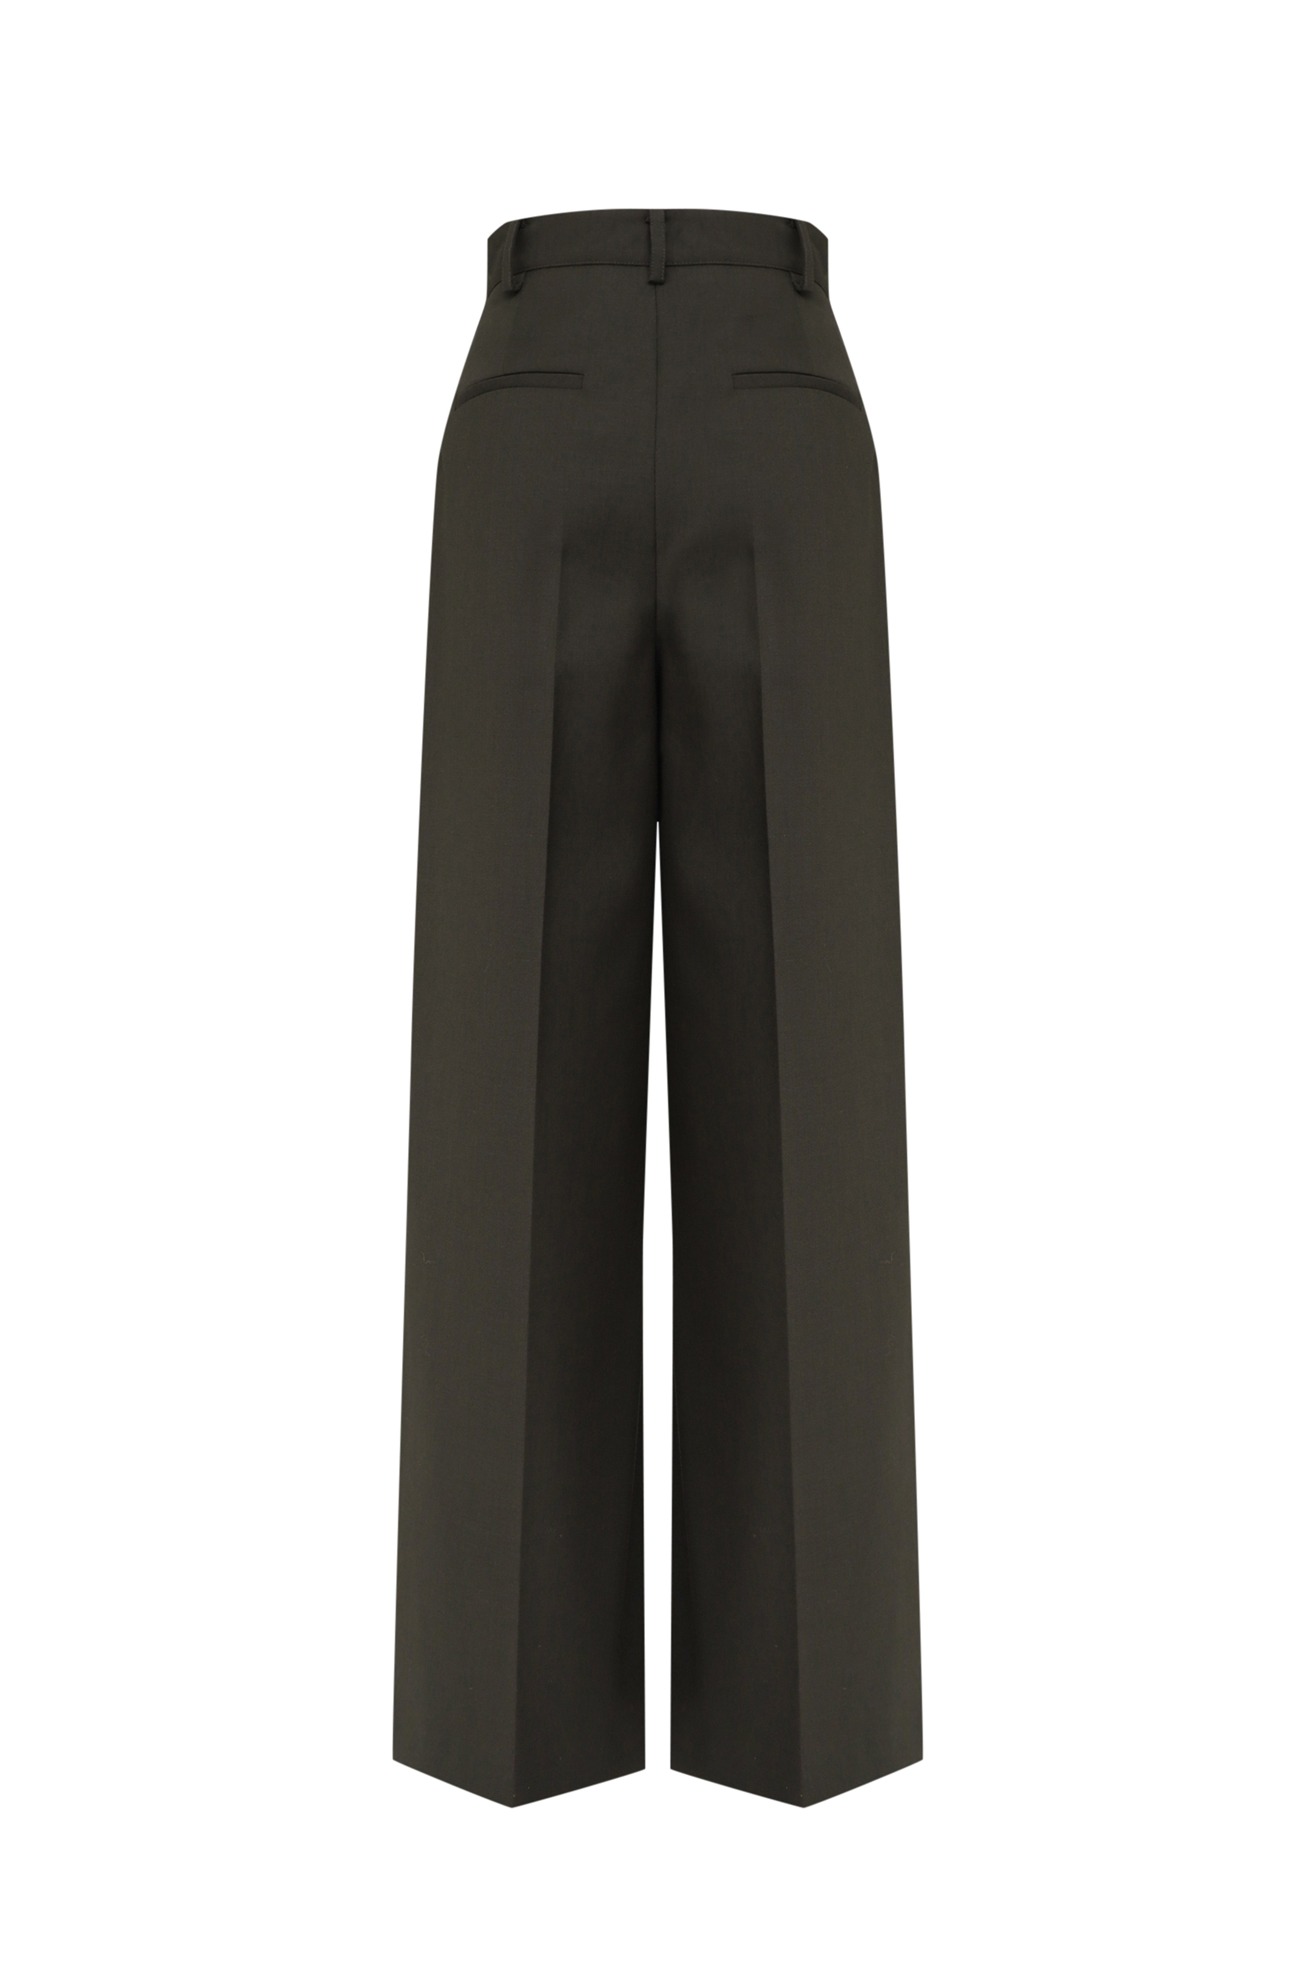 Wool High Waist Pleated Trousers  10/17 순차발송